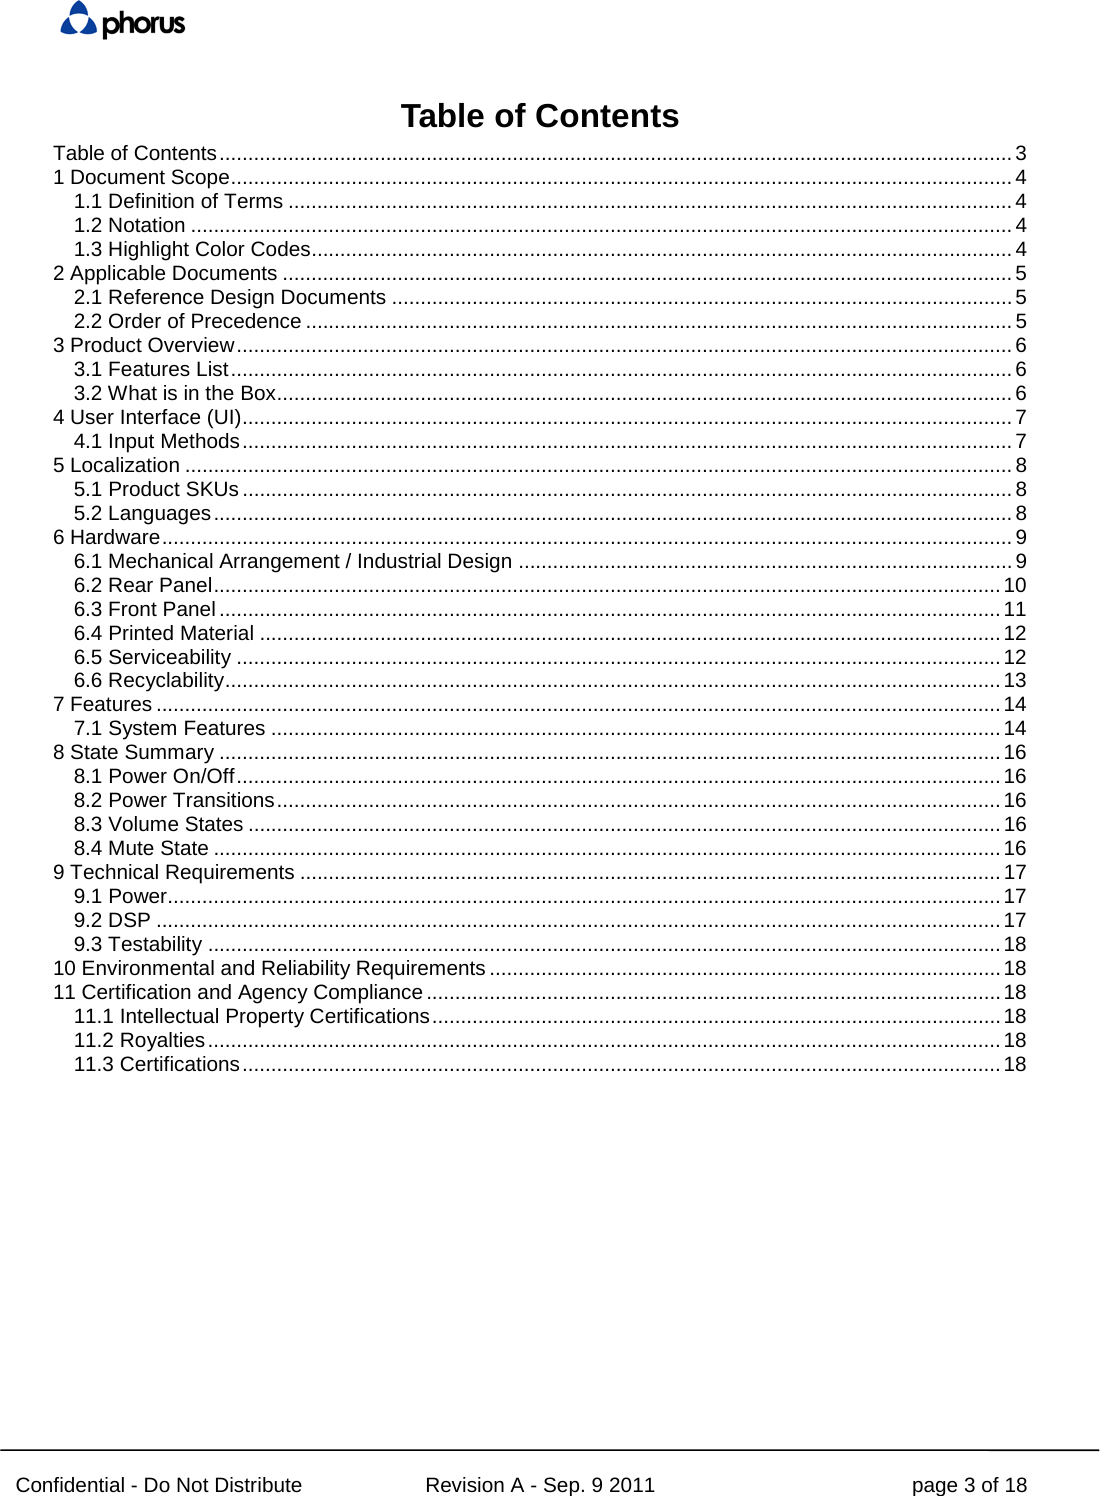  Confidential - Do Not Distribute Revision A - Sep. 9 2011 page 3 of 18 Table of Contents Table of Contents .......................................................................................................................................... 3 1 Document Scope ........................................................................................................................................ 4 1.1 Definition of Terms .............................................................................................................................. 4 1.2 Notation ............................................................................................................................................... 4 1.3 Highlight Color Codes.......................................................................................................................... 4 2 Applicable Documents ............................................................................................................................... 5 2.1 Reference Design Documents ............................................................................................................ 5 2.2 Order of Precedence ........................................................................................................................... 5 3 Product Overview ....................................................................................................................................... 6 3.1 Features List ........................................................................................................................................ 6 3.2 What is in the Box ................................................................................................................................ 6 4 User Interface (UI) ...................................................................................................................................... 7 4.1 Input Methods ...................................................................................................................................... 7 5 Localization ................................................................................................................................................ 8 5.1 Product SKUs ...................................................................................................................................... 8 5.2 Languages ........................................................................................................................................... 8 6 Hardware .................................................................................................................................................... 9 6.1 Mechanical Arrangement / Industrial Design ...................................................................................... 9 6.2 Rear Panel ......................................................................................................................................... 10 6.3 Front Panel ........................................................................................................................................ 11 6.4 Printed Material ................................................................................................................................. 12 6.5 Serviceability ..................................................................................................................................... 12 6.6 Recyclability ....................................................................................................................................... 13 7 Features ................................................................................................................................................... 14 7.1 System Features ............................................................................................................................... 14 8 State Summary ........................................................................................................................................ 16 8.1 Power On/Off ..................................................................................................................................... 16 8.2 Power Transitions .............................................................................................................................. 16 8.3 Volume States ................................................................................................................................... 16 8.4 Mute State ......................................................................................................................................... 16 9 Technical Requirements .......................................................................................................................... 17 9.1 Power................................................................................................................................................. 17 9.2 DSP ................................................................................................................................................... 17 9.3 Testability .......................................................................................................................................... 18 10 Environmental and Reliability Requirements ......................................................................................... 18 11 Certification and Agency Compliance .................................................................................................... 18 11.1 Intellectual Property Certifications ................................................................................................... 18 11.2 Royalties .......................................................................................................................................... 18 11.3 Certifications .................................................................................................................................... 18  